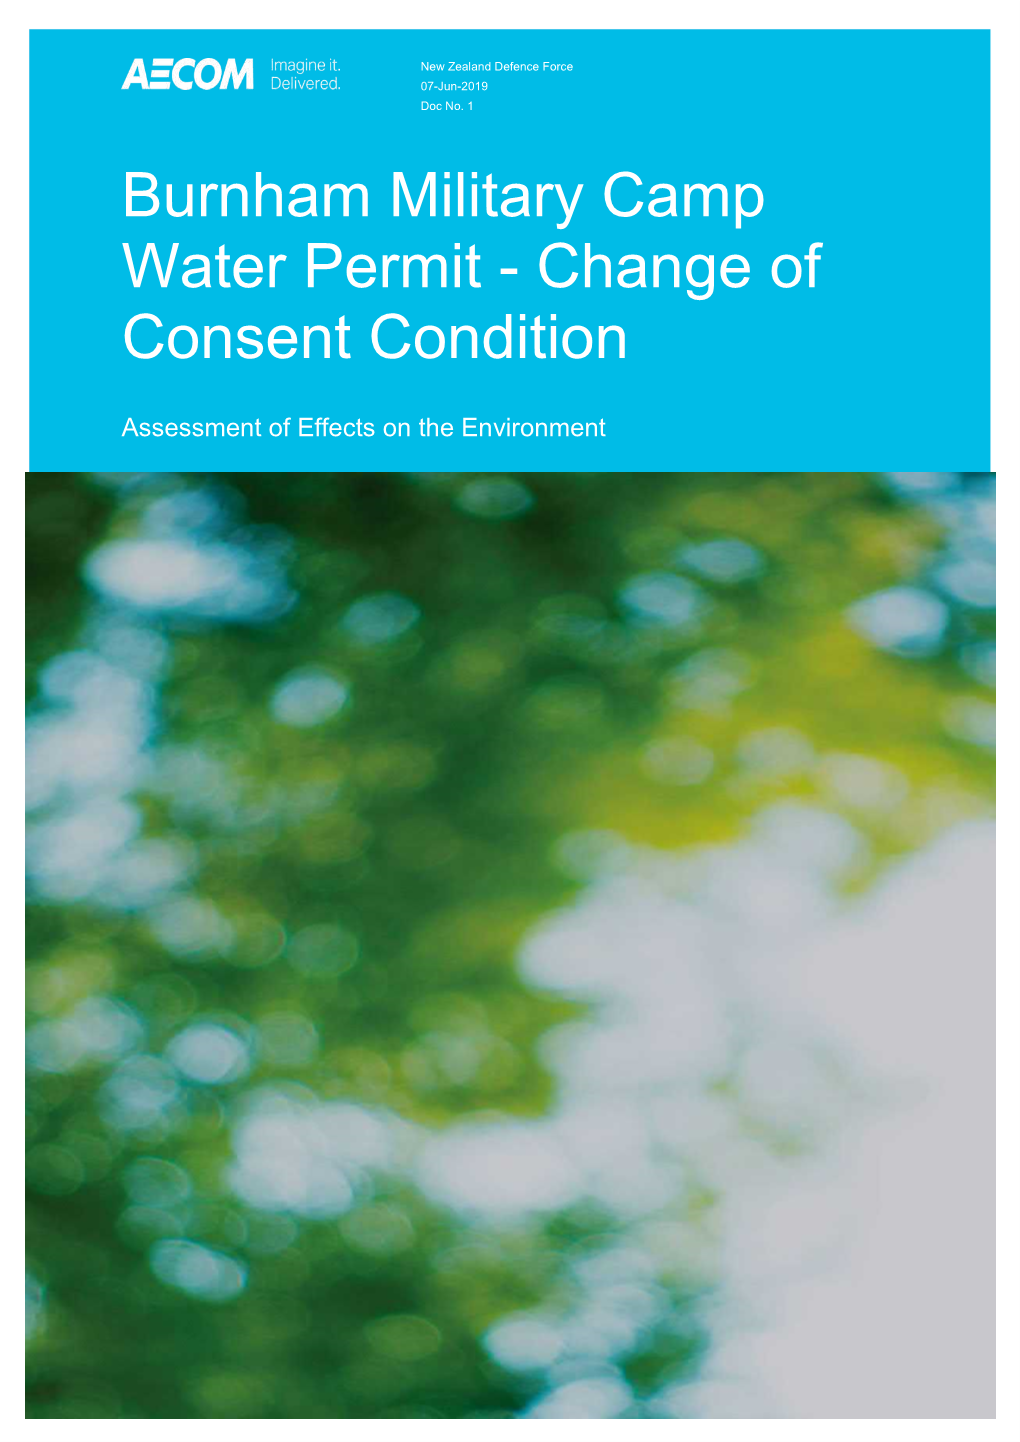 Burnham Military Camp Water Permit - Change of Consent Condition